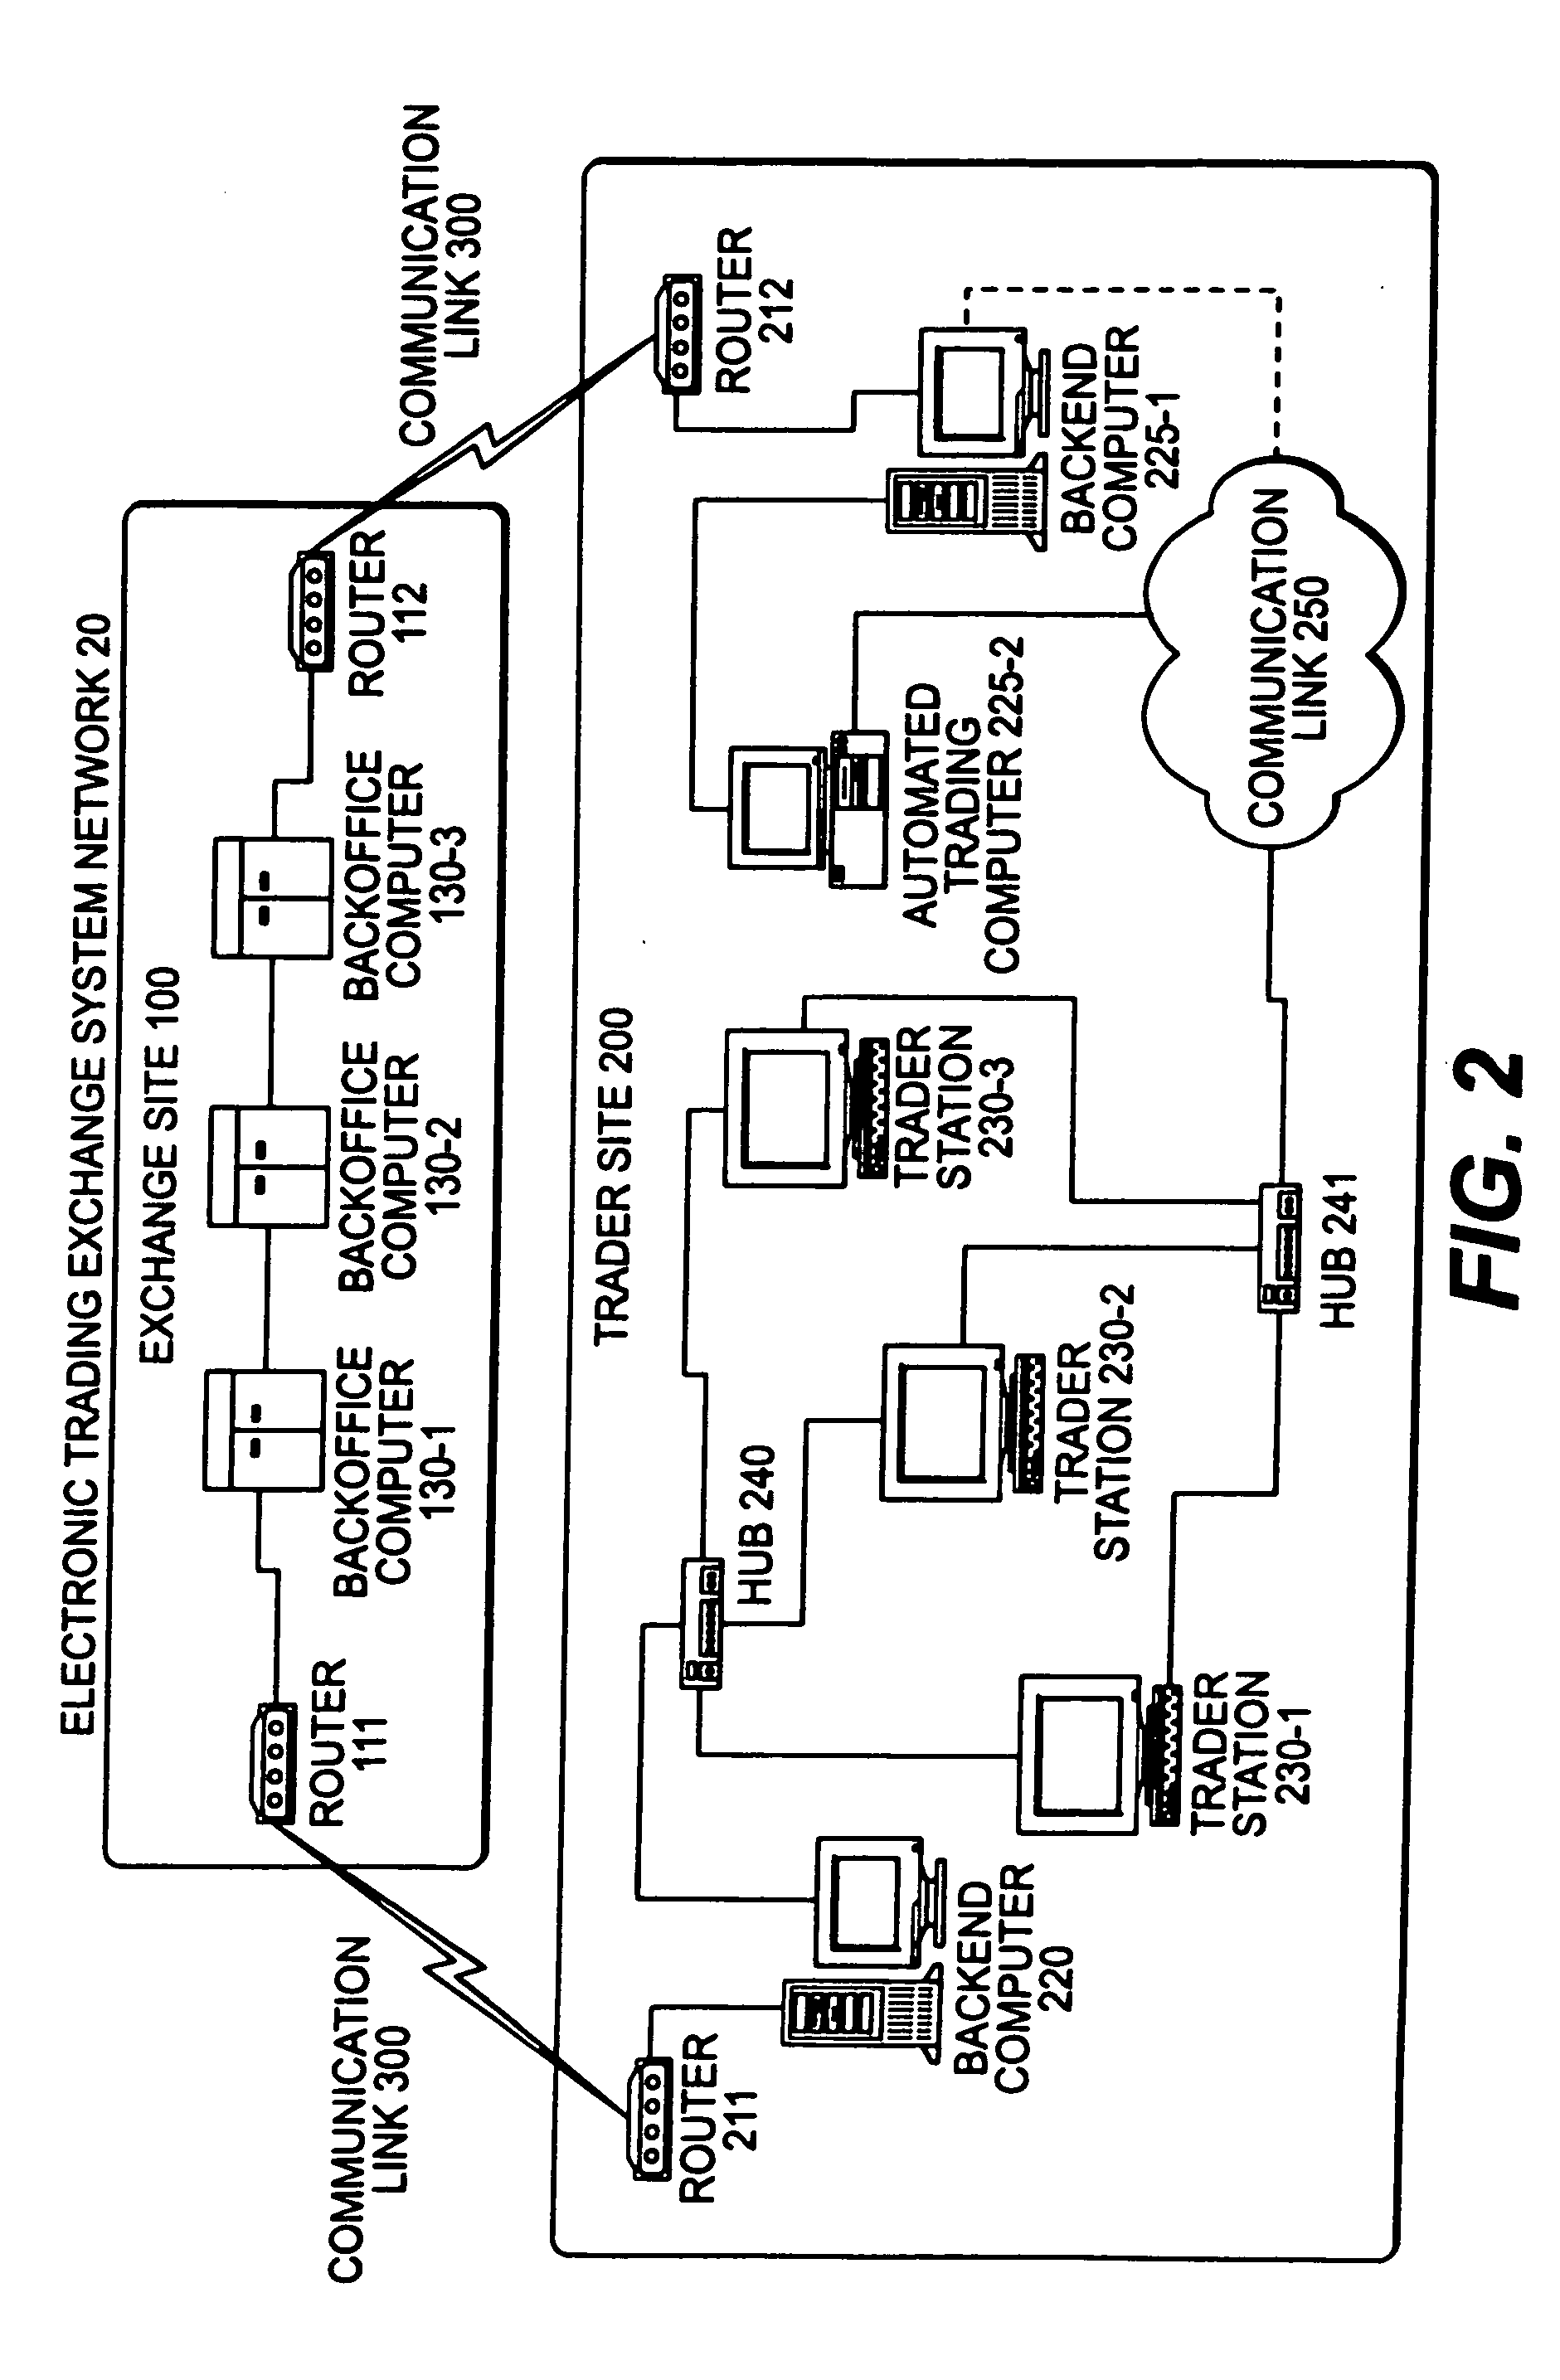 Automated trading system in an electronic trading exchange